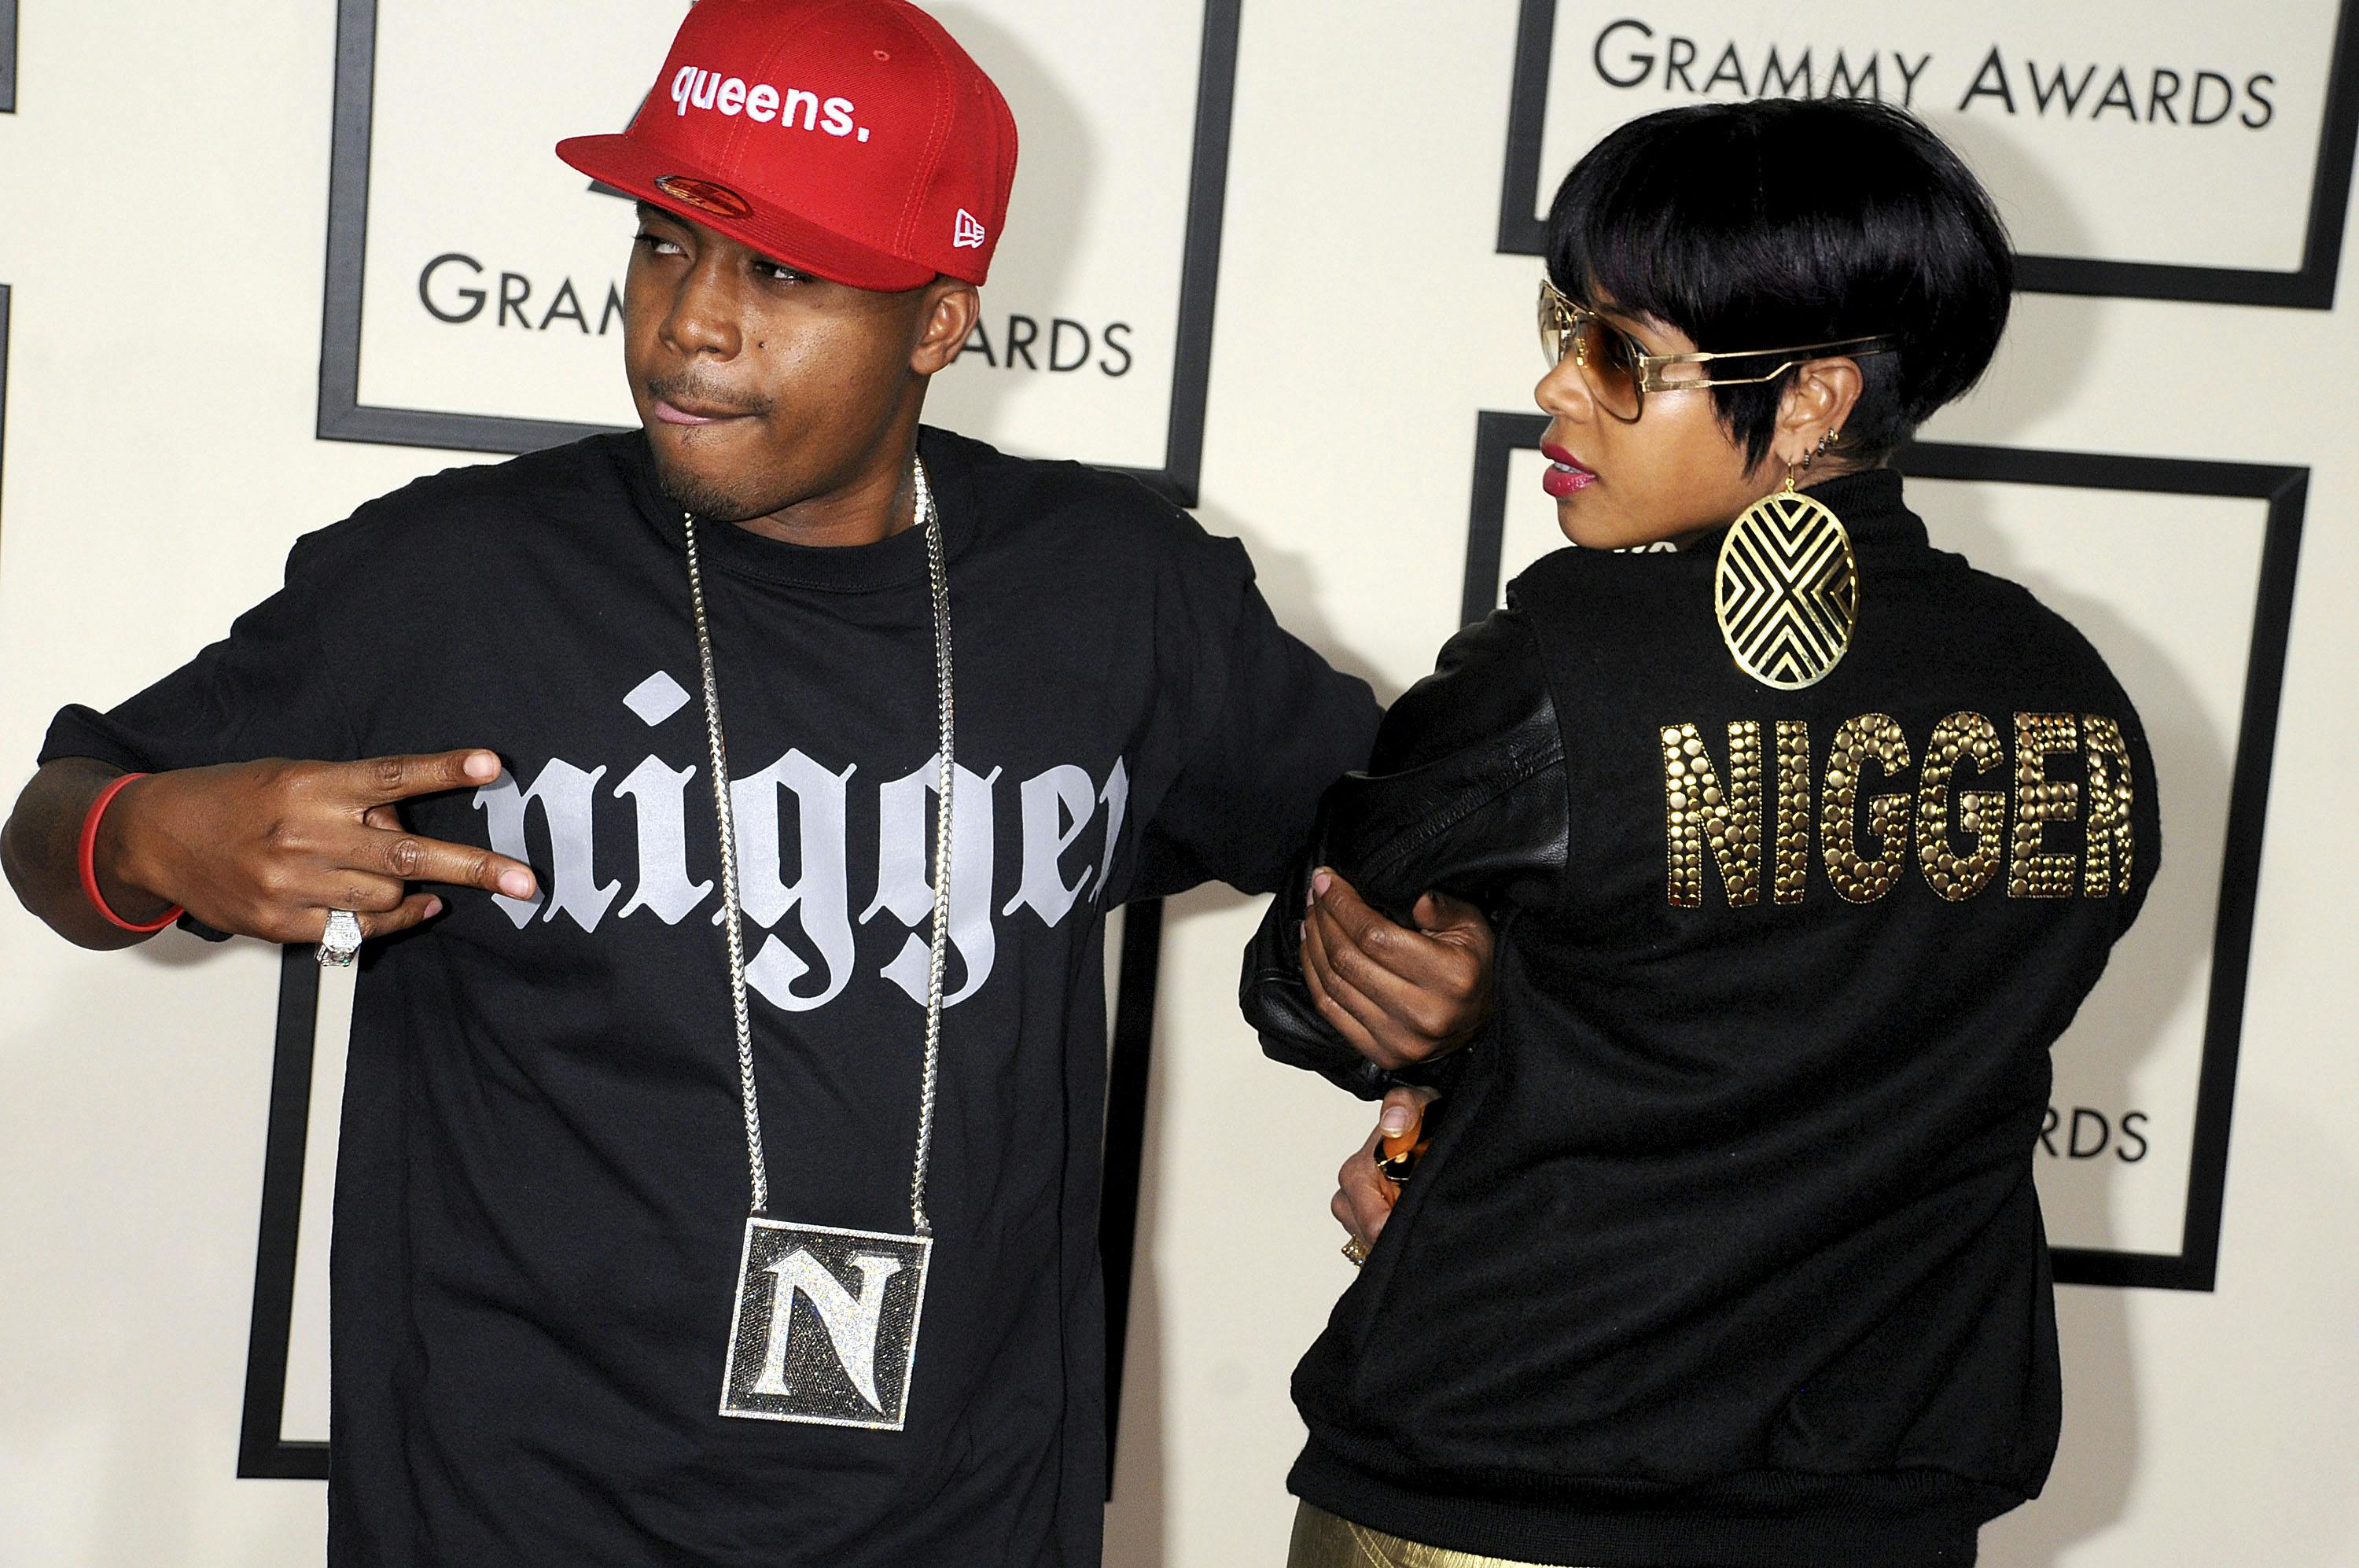 Rapper Nas and Rapper Kelis in the press room at the 50th Annual GRAMMY Awards at the Staples Center on February 10, 2008 in Los Angeles, California.